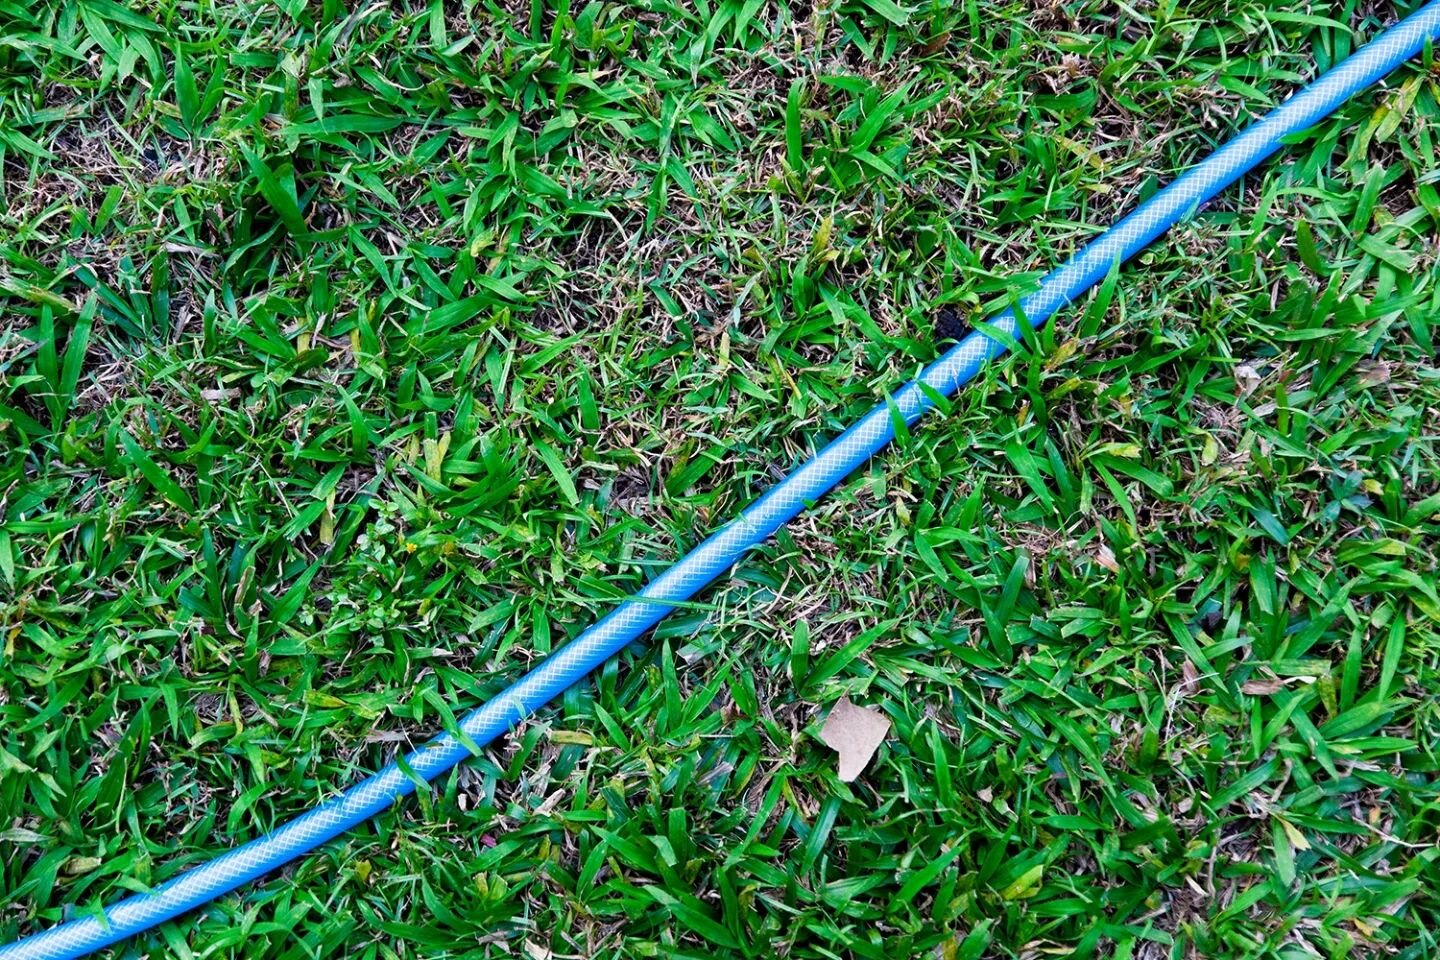 The other day while out with my kids taking photos, I saw the water hose snaking around the grounds and thought, &quot;hm. What would that look like if it were in a frame?&quot; It then led to me capturing many pictures of different lines around the 